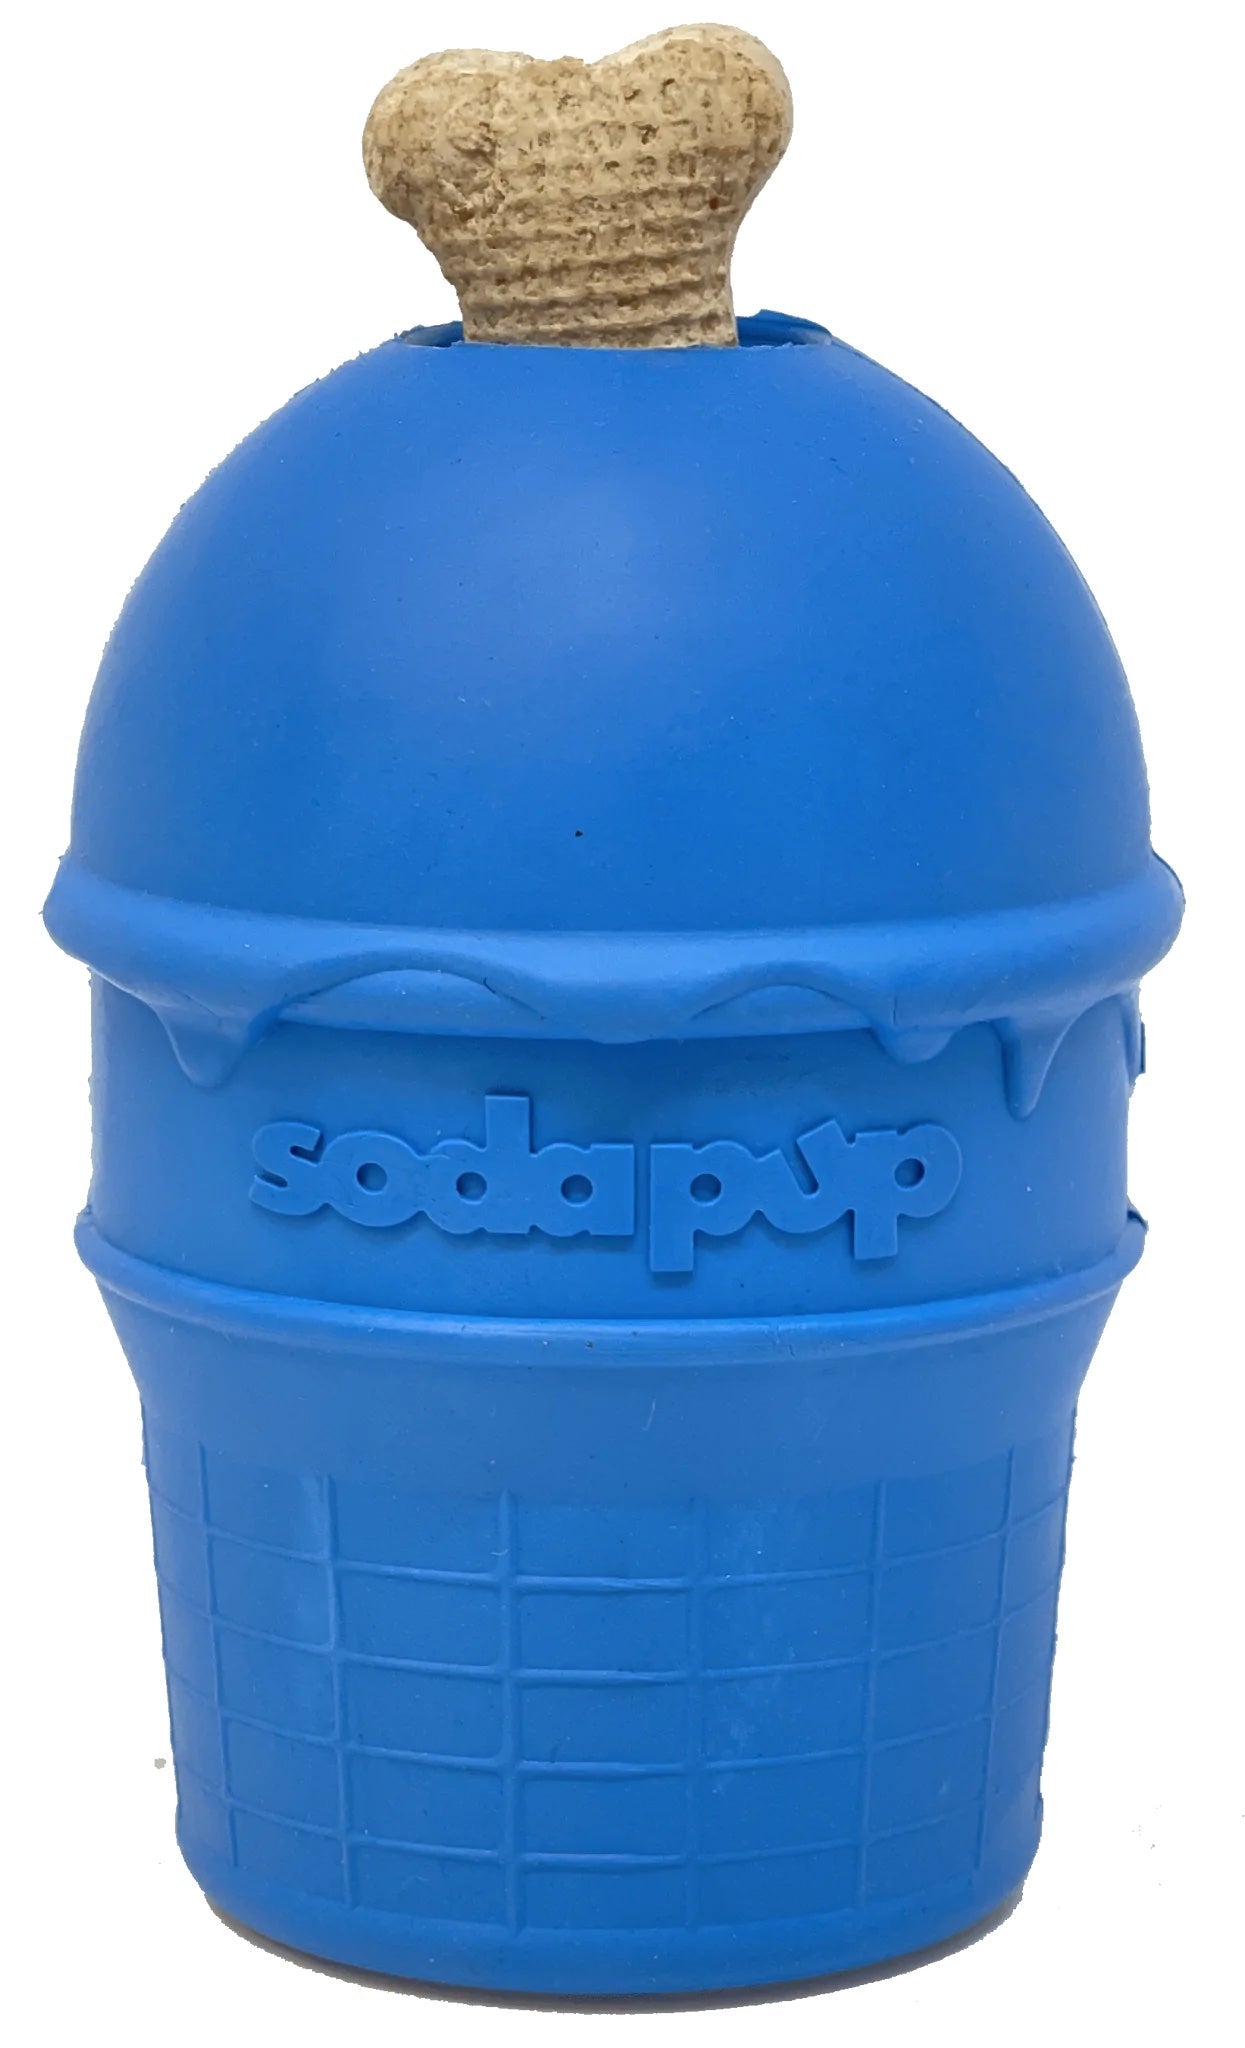 https://shop.fourmuddypaws.com/cdn/shop/products/SodaPup-Rubber-Ice-Cream-Cone-Chew-Toy-and-Treat-Dispenser-Blue-Medium-Four-Muddy-Paws.jpg?v=1661996452&width=2400